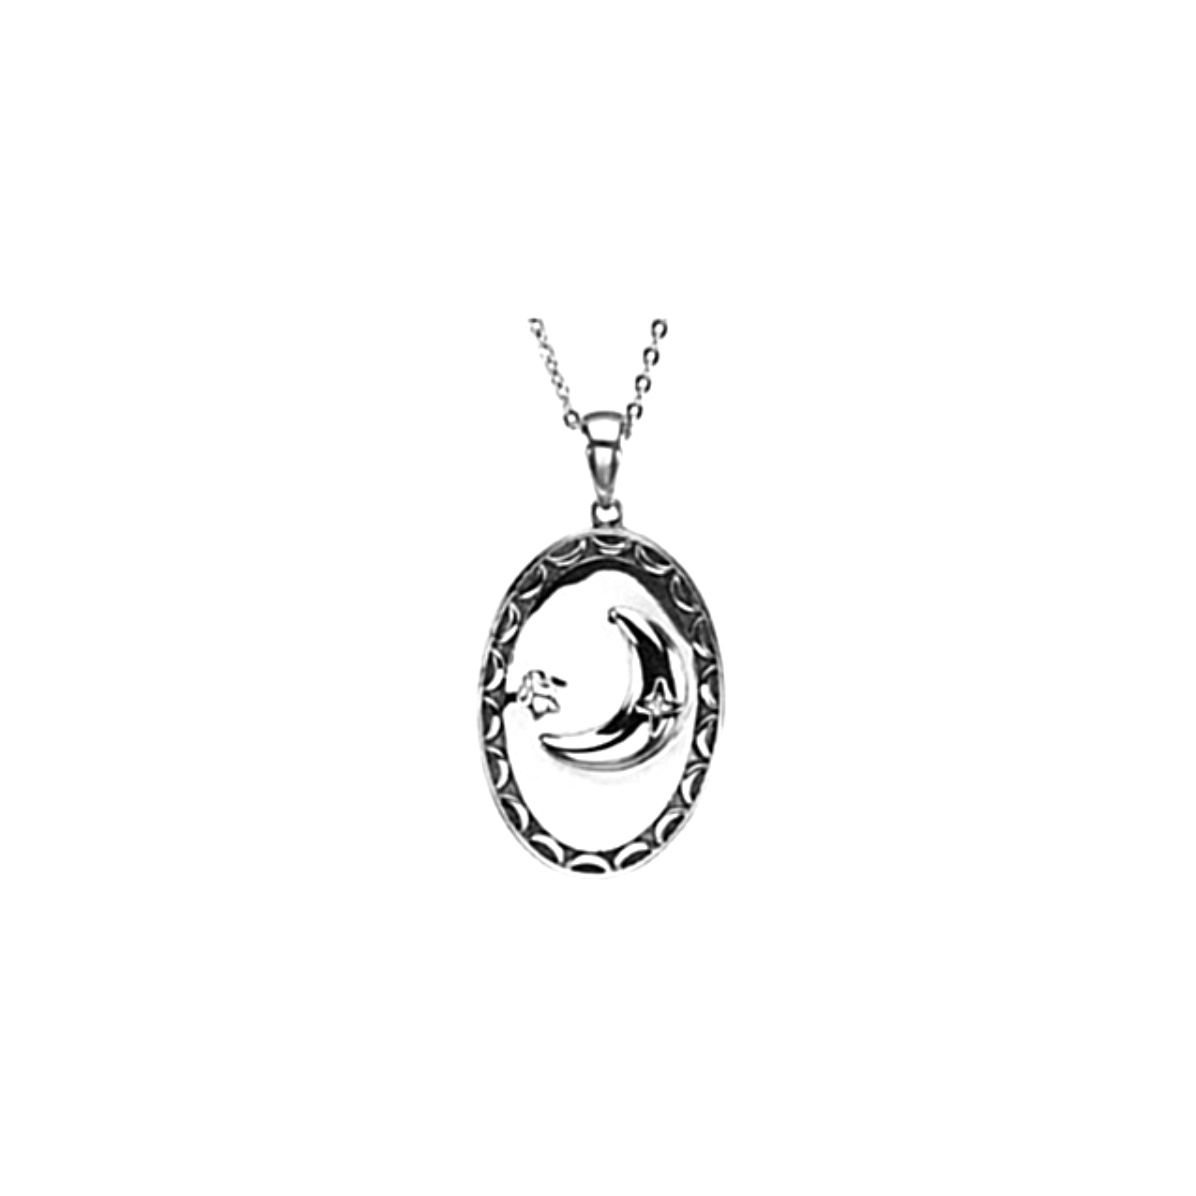 Diamond 'I Love you' Moon and Star Rhodium Plate Sterling Silver Pendant Necklace. 